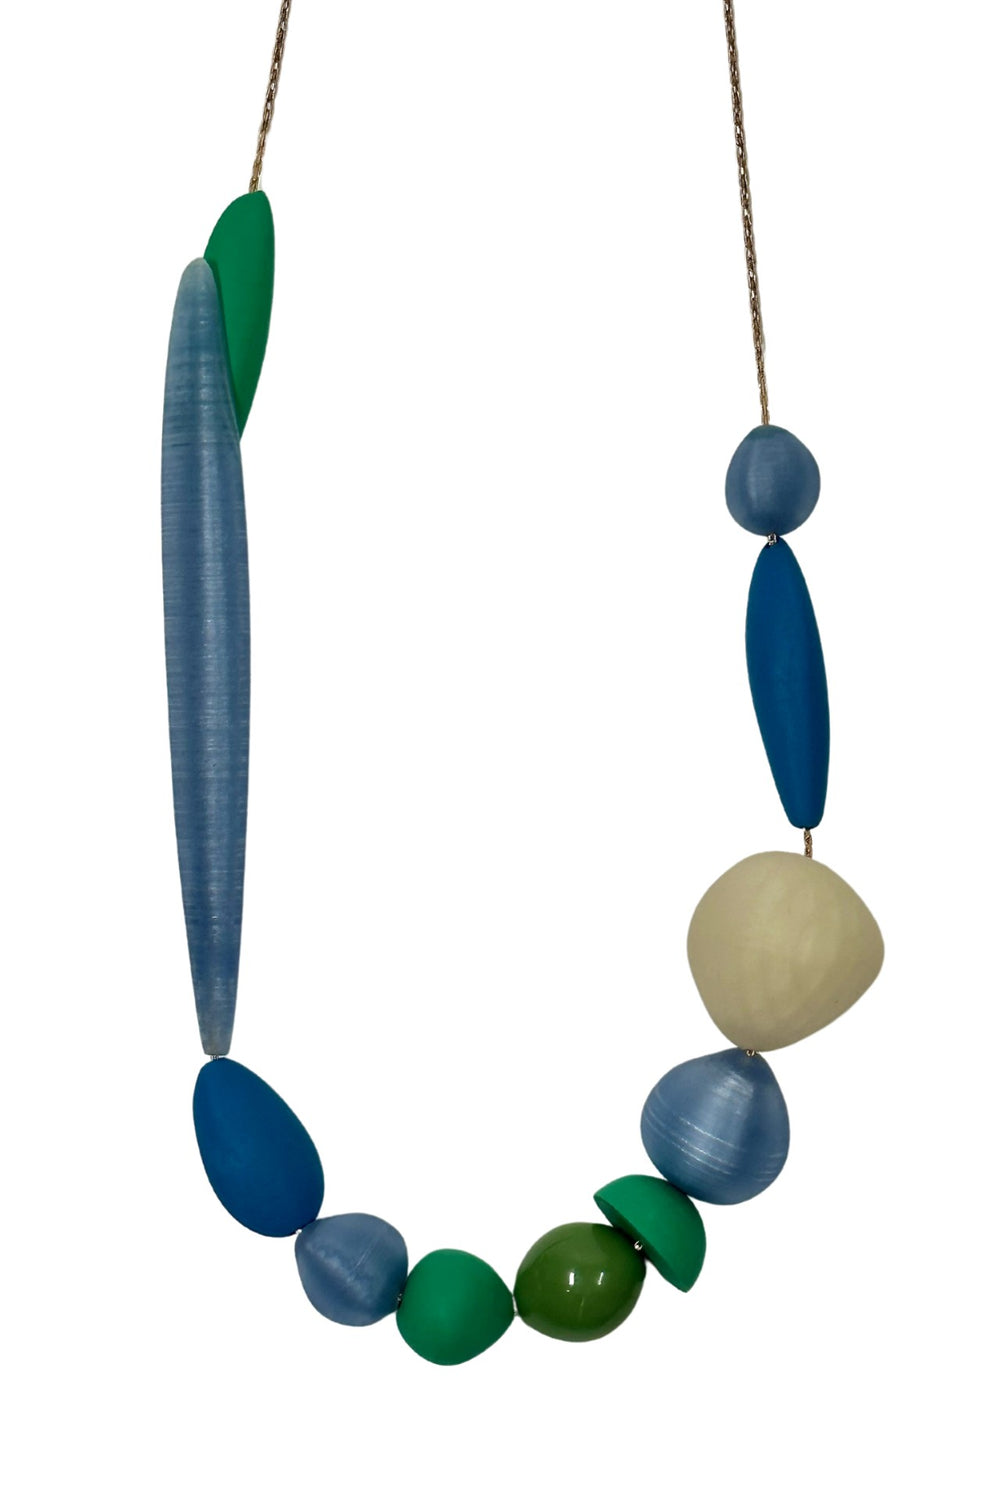 Mixed Beads Necklace